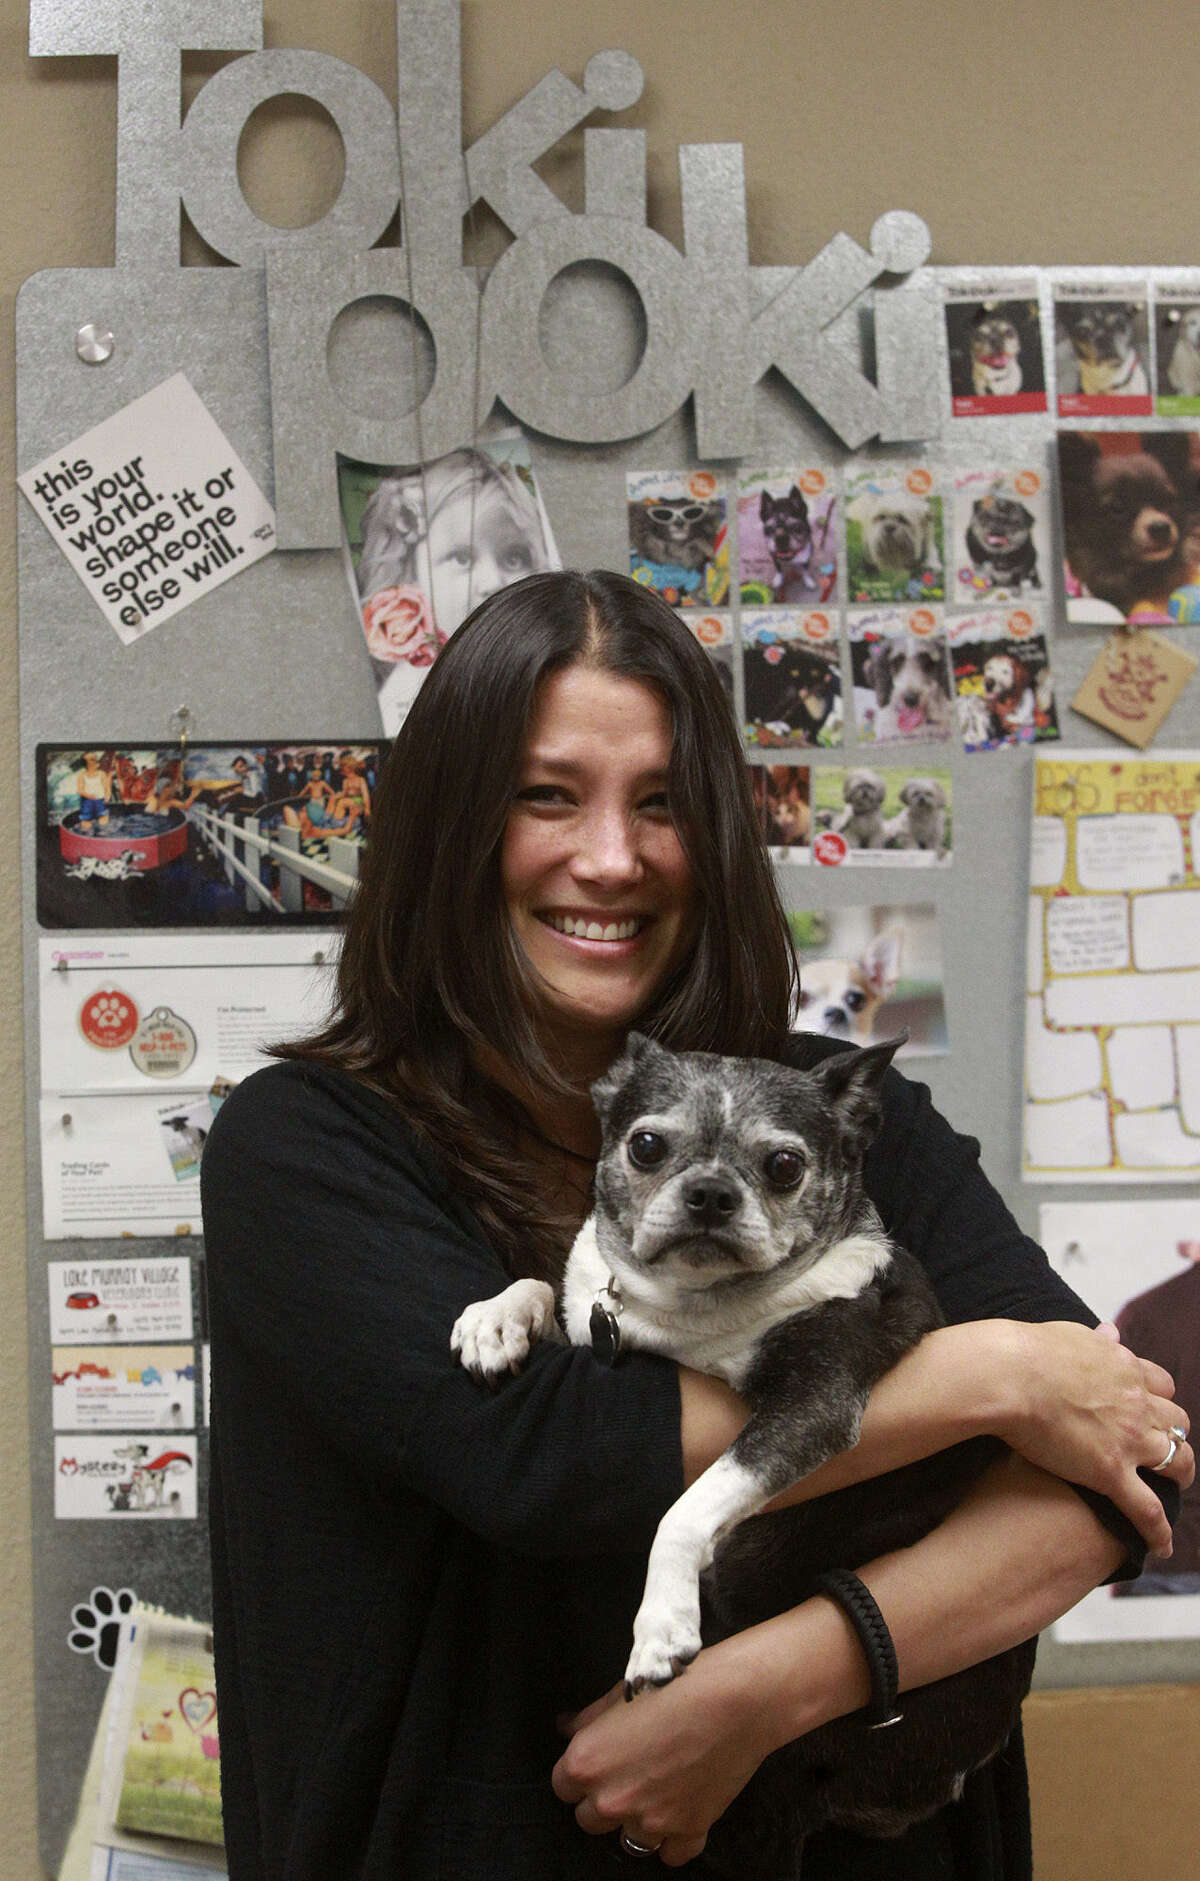 Christy Myhre spends time Tuesday May 13, 2014 with her dog Toki in her office at Toki Poki. Toki Poki makes pet trading cards for pet owners and gives them out to child patients at hospitals. Toki will be 15 years old this year.